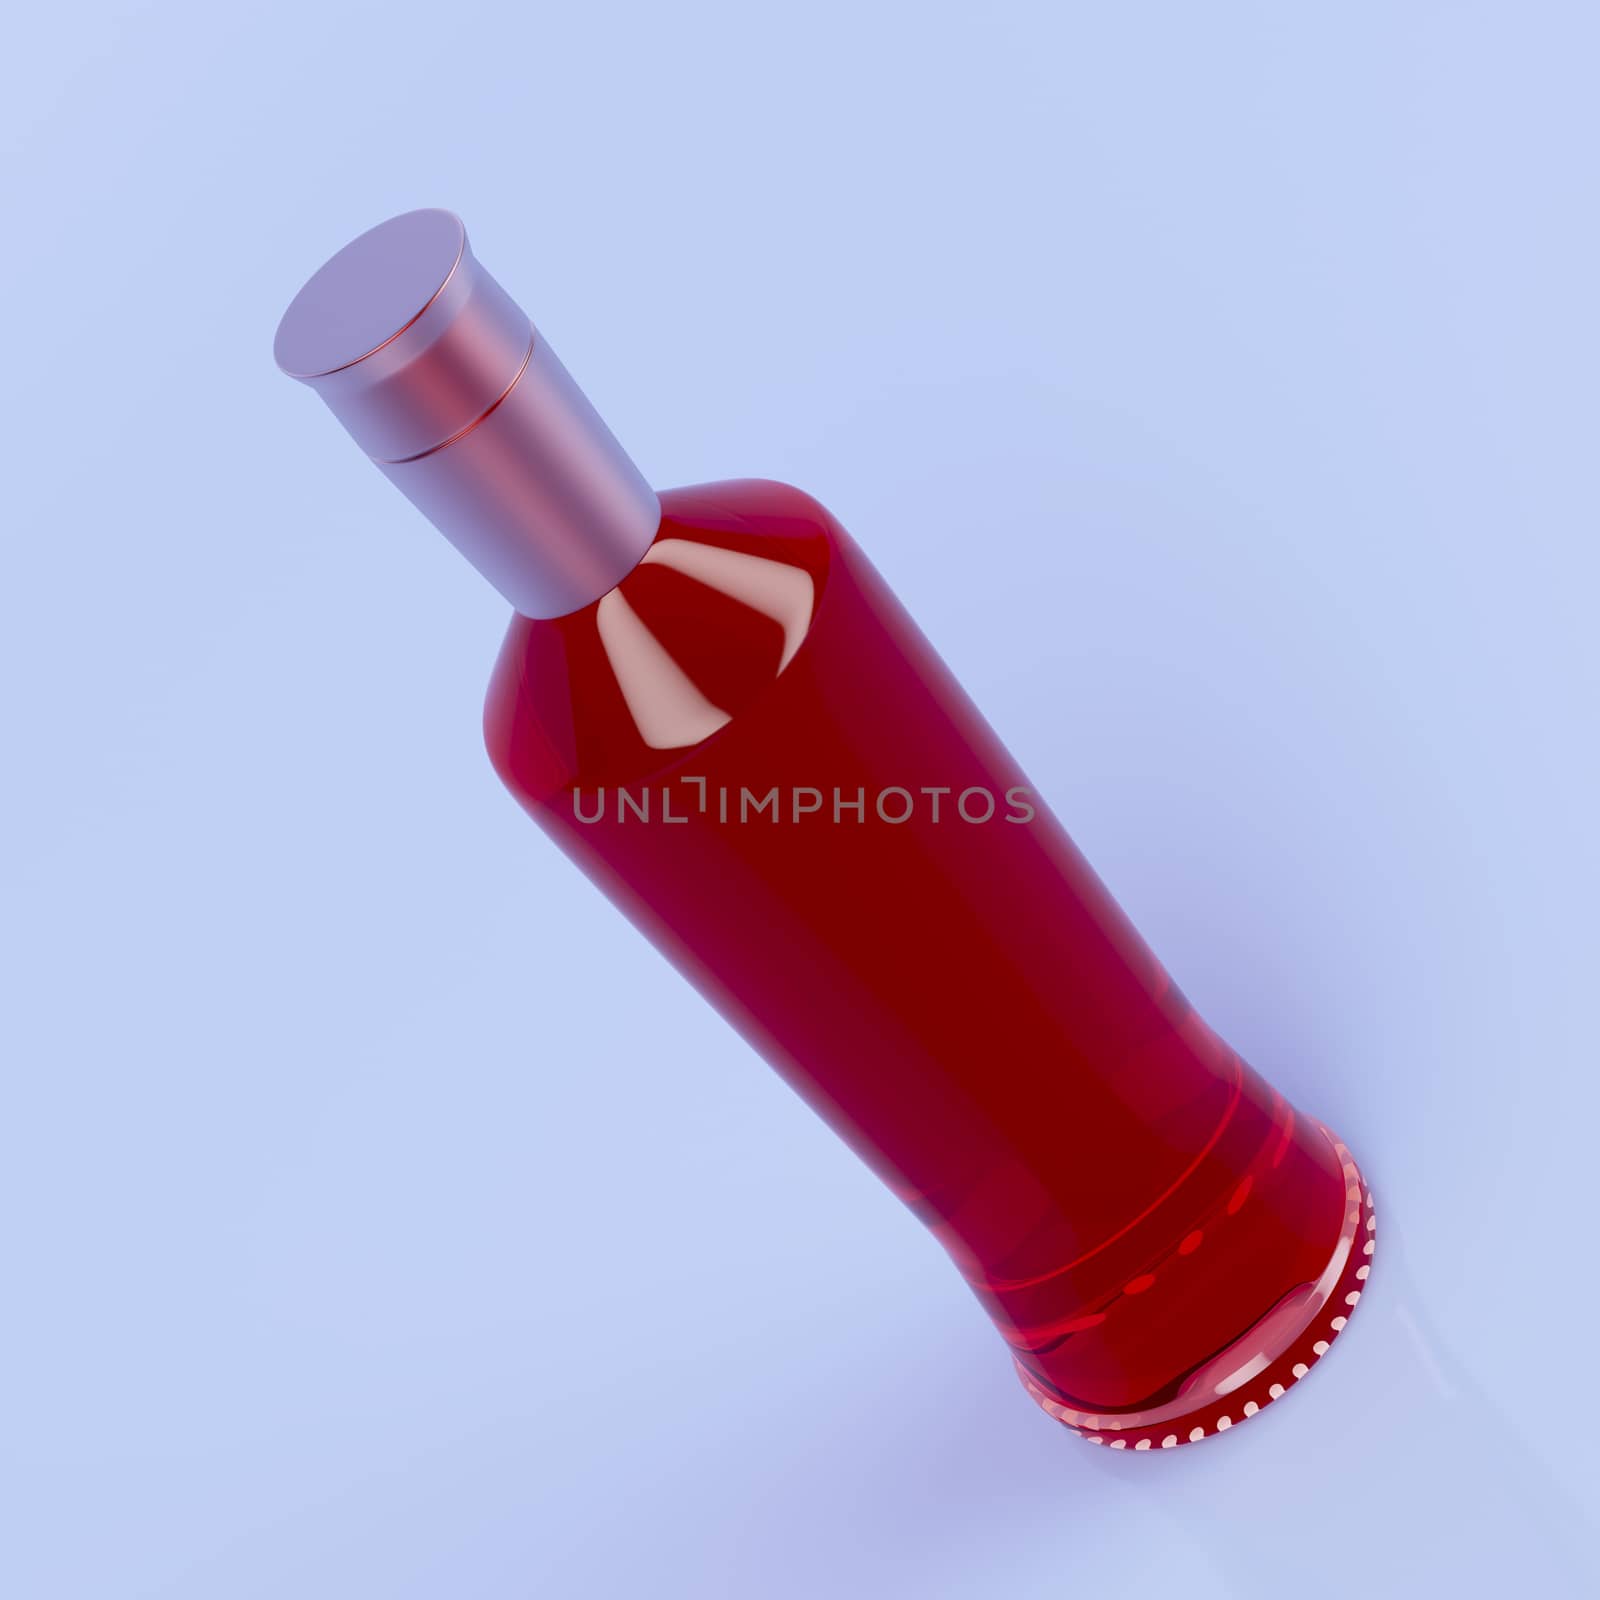 Liqueur by magraphics